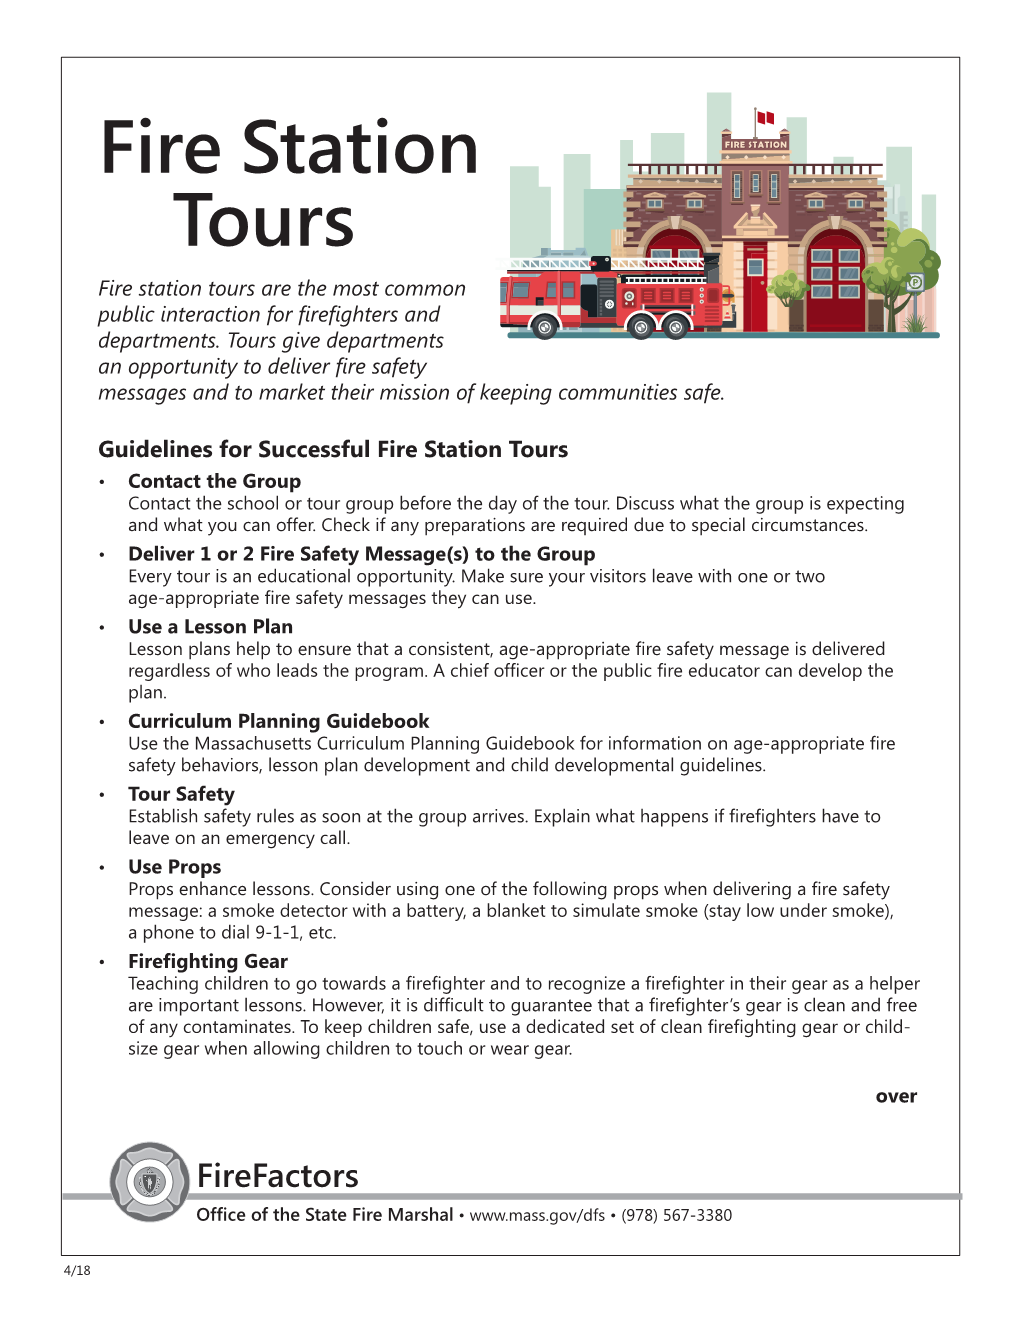 Fire Station Tours Fire Station Tours Are the Most Common Public Interaction for Firefighters and Departments